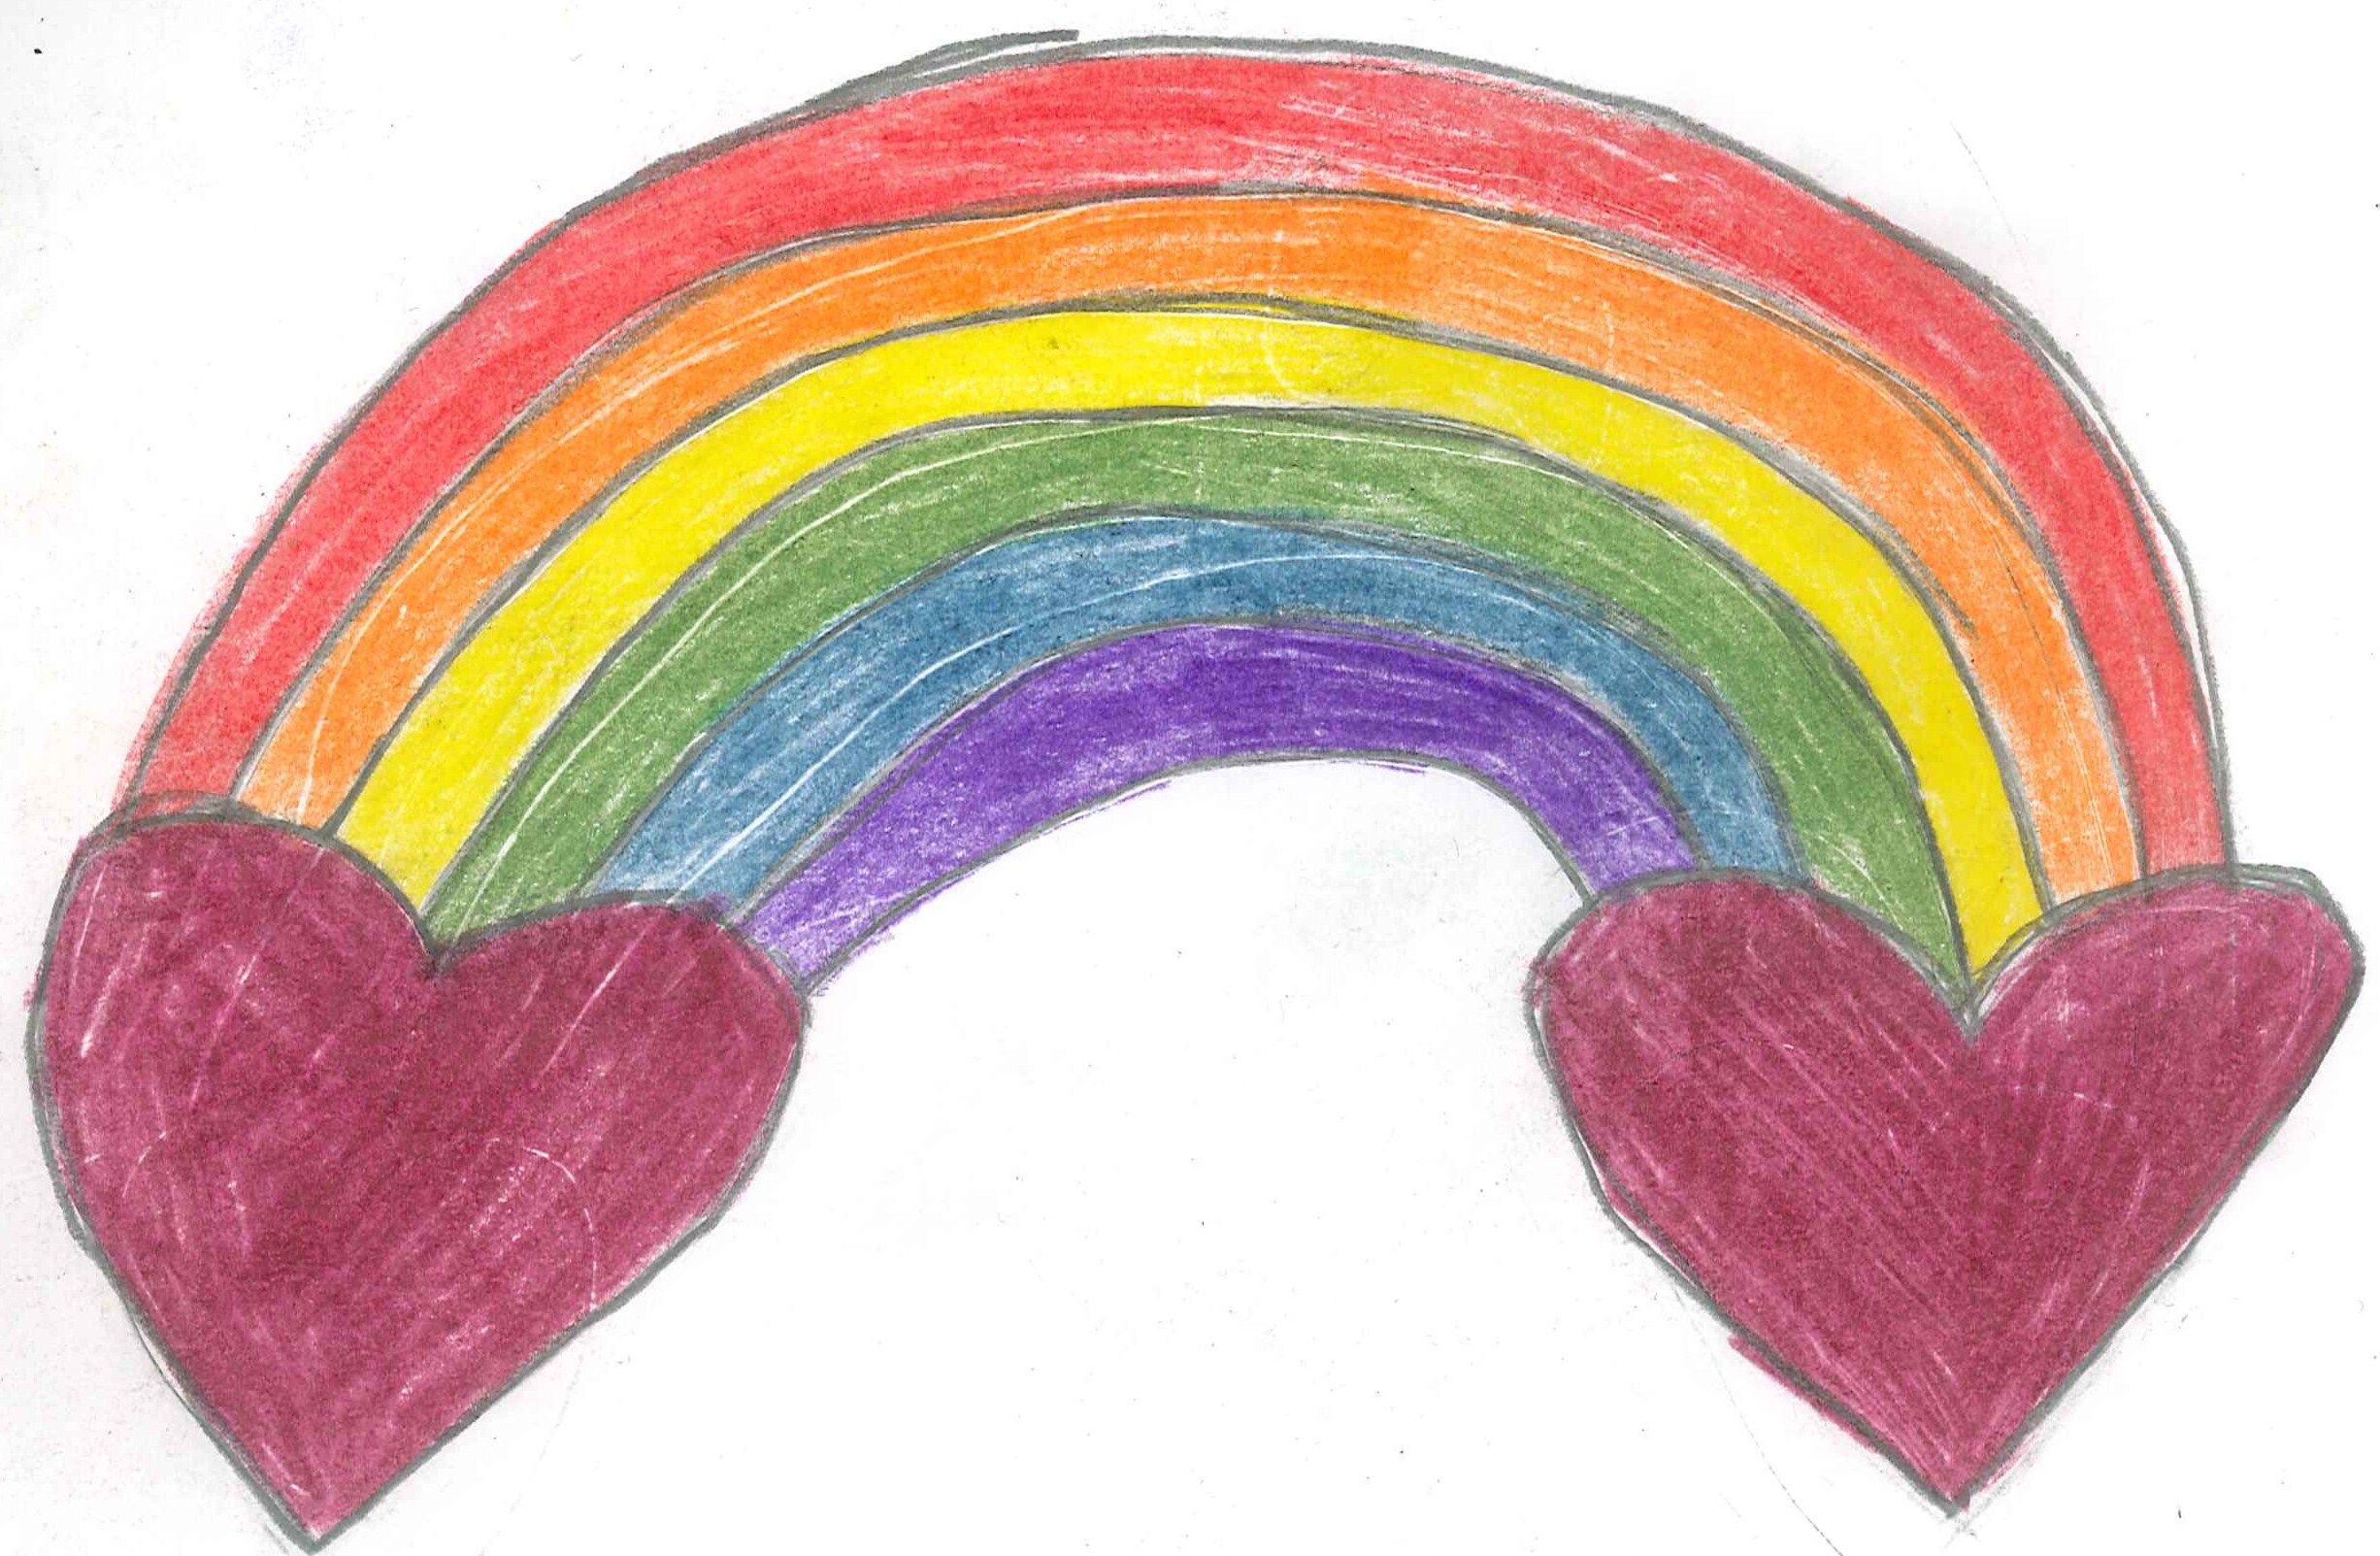 Rainbow Drawings - ClipArt Best